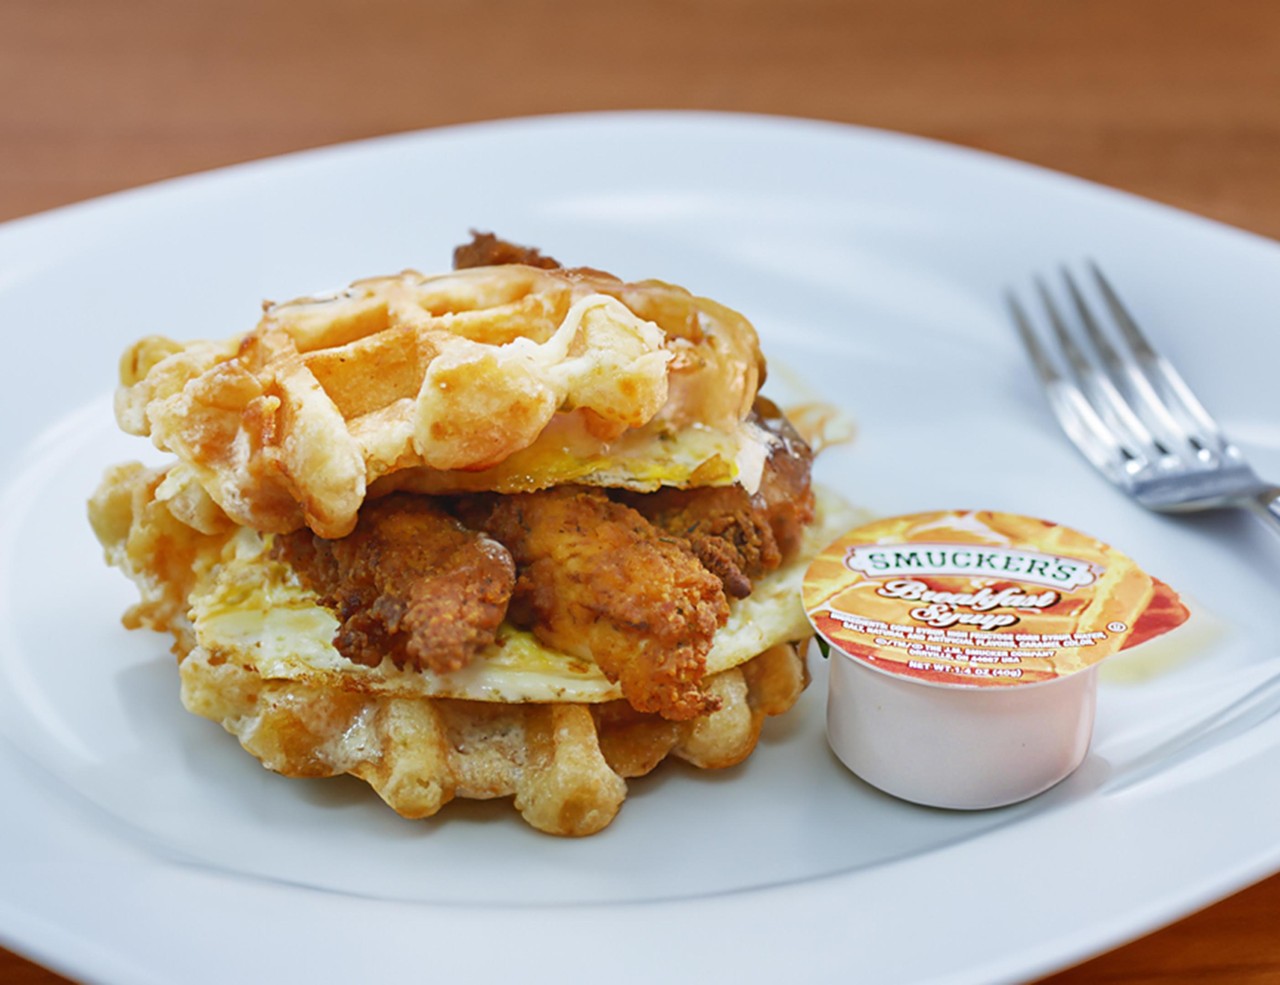 WAFFLE CHICKEN SANDWICH
Two waffles - pepperjack cheese for that spicy kick, chicken tenders and two eggs! It’s the best brunch around town! Pair this with a Cuban coffee and you’re set! 
The Bean Bar Co